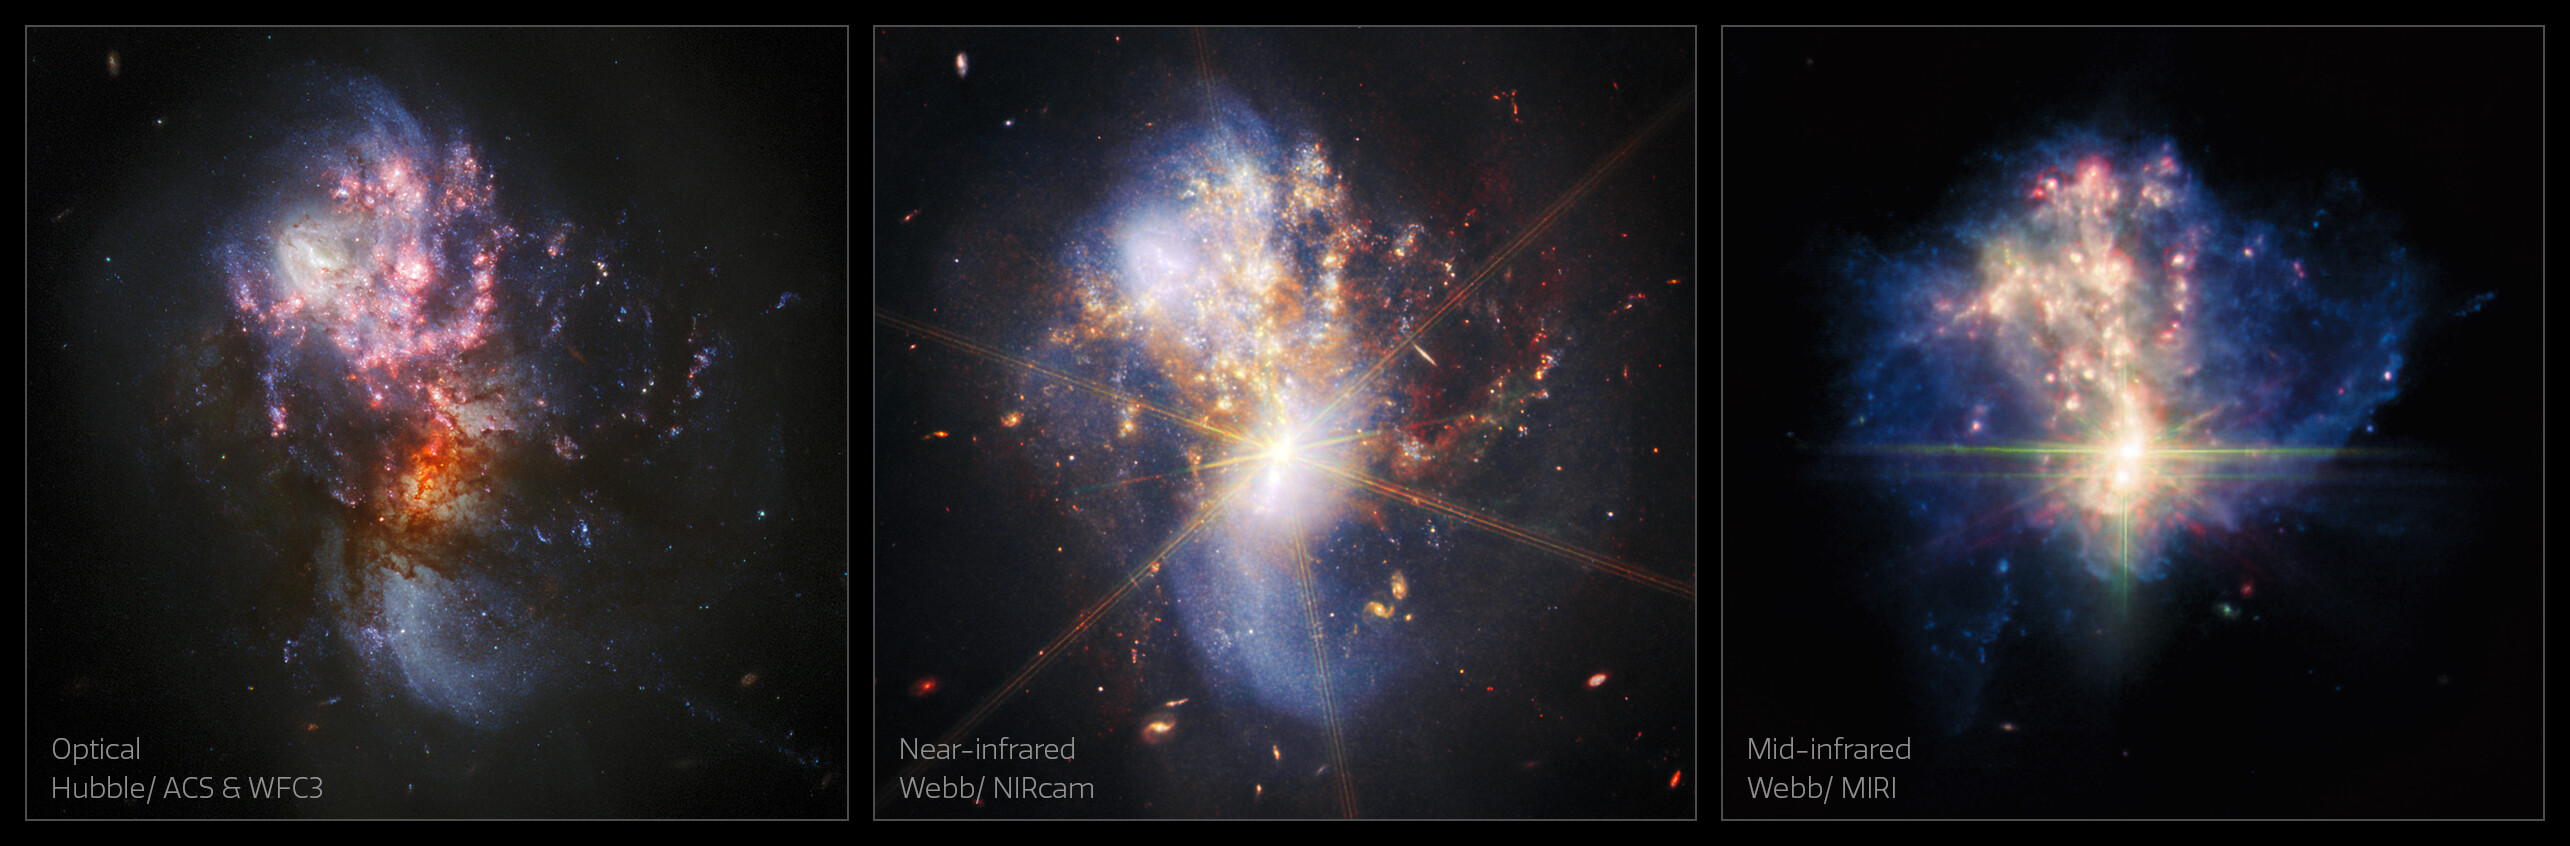 Here, the Webb Picture of the Month of merging galaxies IC 1623 A and B is juxtaposed with a new image from the NASA/ESA Hubble Space Telescope. In the Webb MIRI image, the bright core, heated gas and dust, and young star forming regions are all visible. The Hubble and Webb NIRCAM images show the galaxies distorted spiral arms, while MIRI reveals the faint ghostly glow of interstellar dust. The image consists of three panels, each depicting the two merging galaxies on a dark background. The left panel is labelled “Optical Hubble/WFC3 & ACS”, the middle “Near-infrared Webb/NIRCam” and the right “Mid-infrared Webb/MIRI”. In the MIRI image, only the bright core, heated gas and bubbles of star formation are visible. The other two images also show the galaxies’ spiral arms.